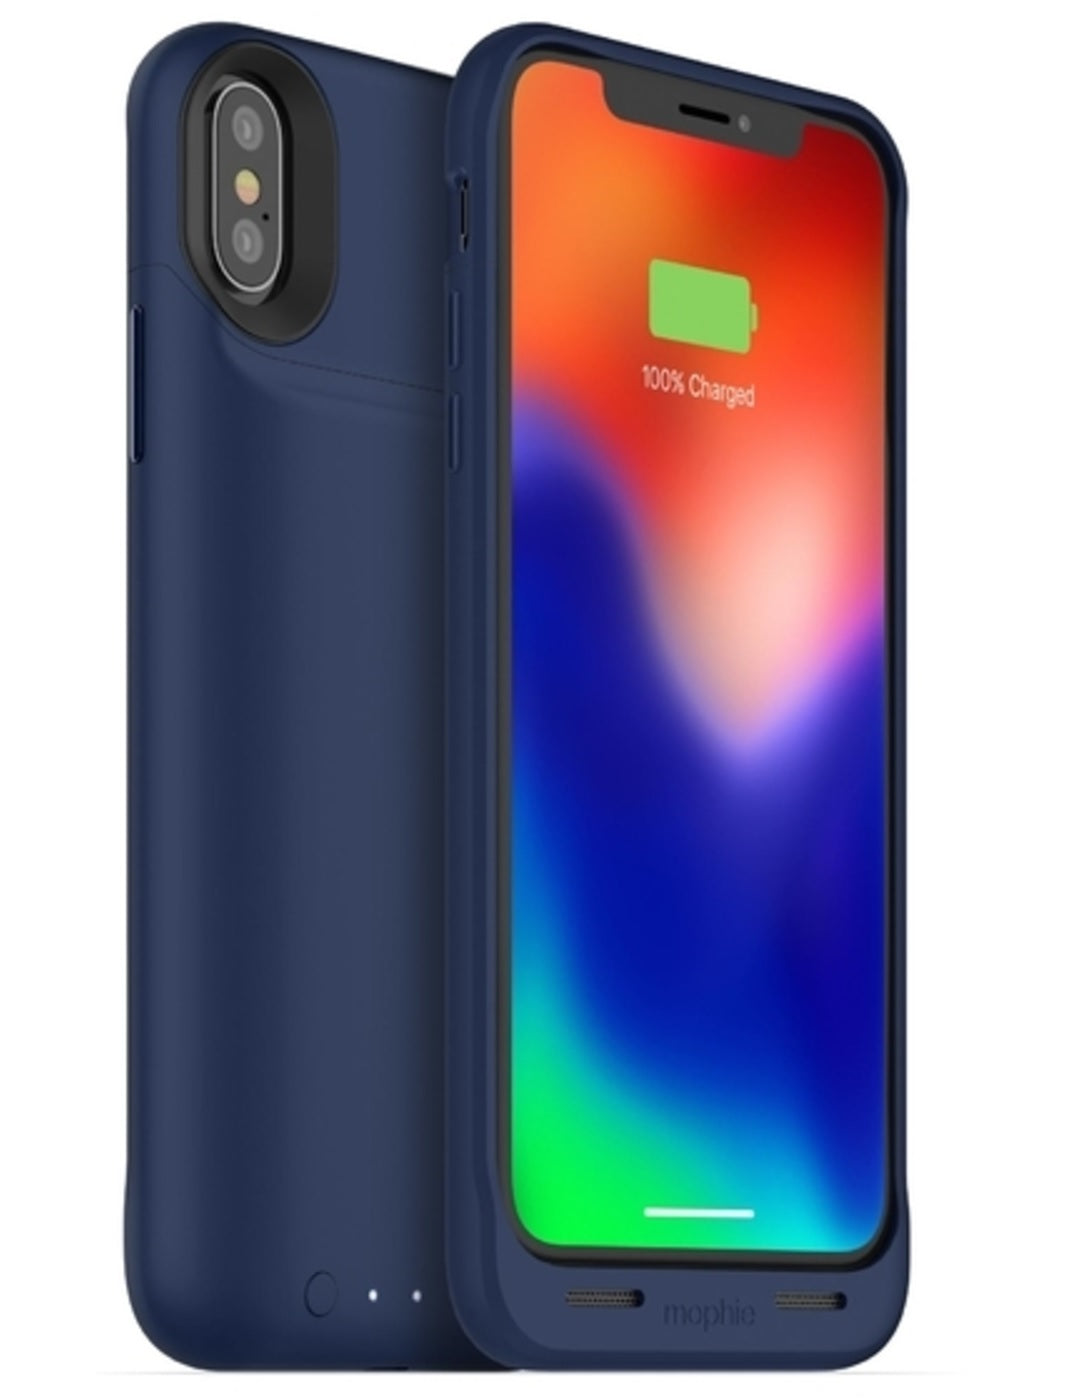 mophie 401002006 Juice Air Battery iPhone X Case, Blue